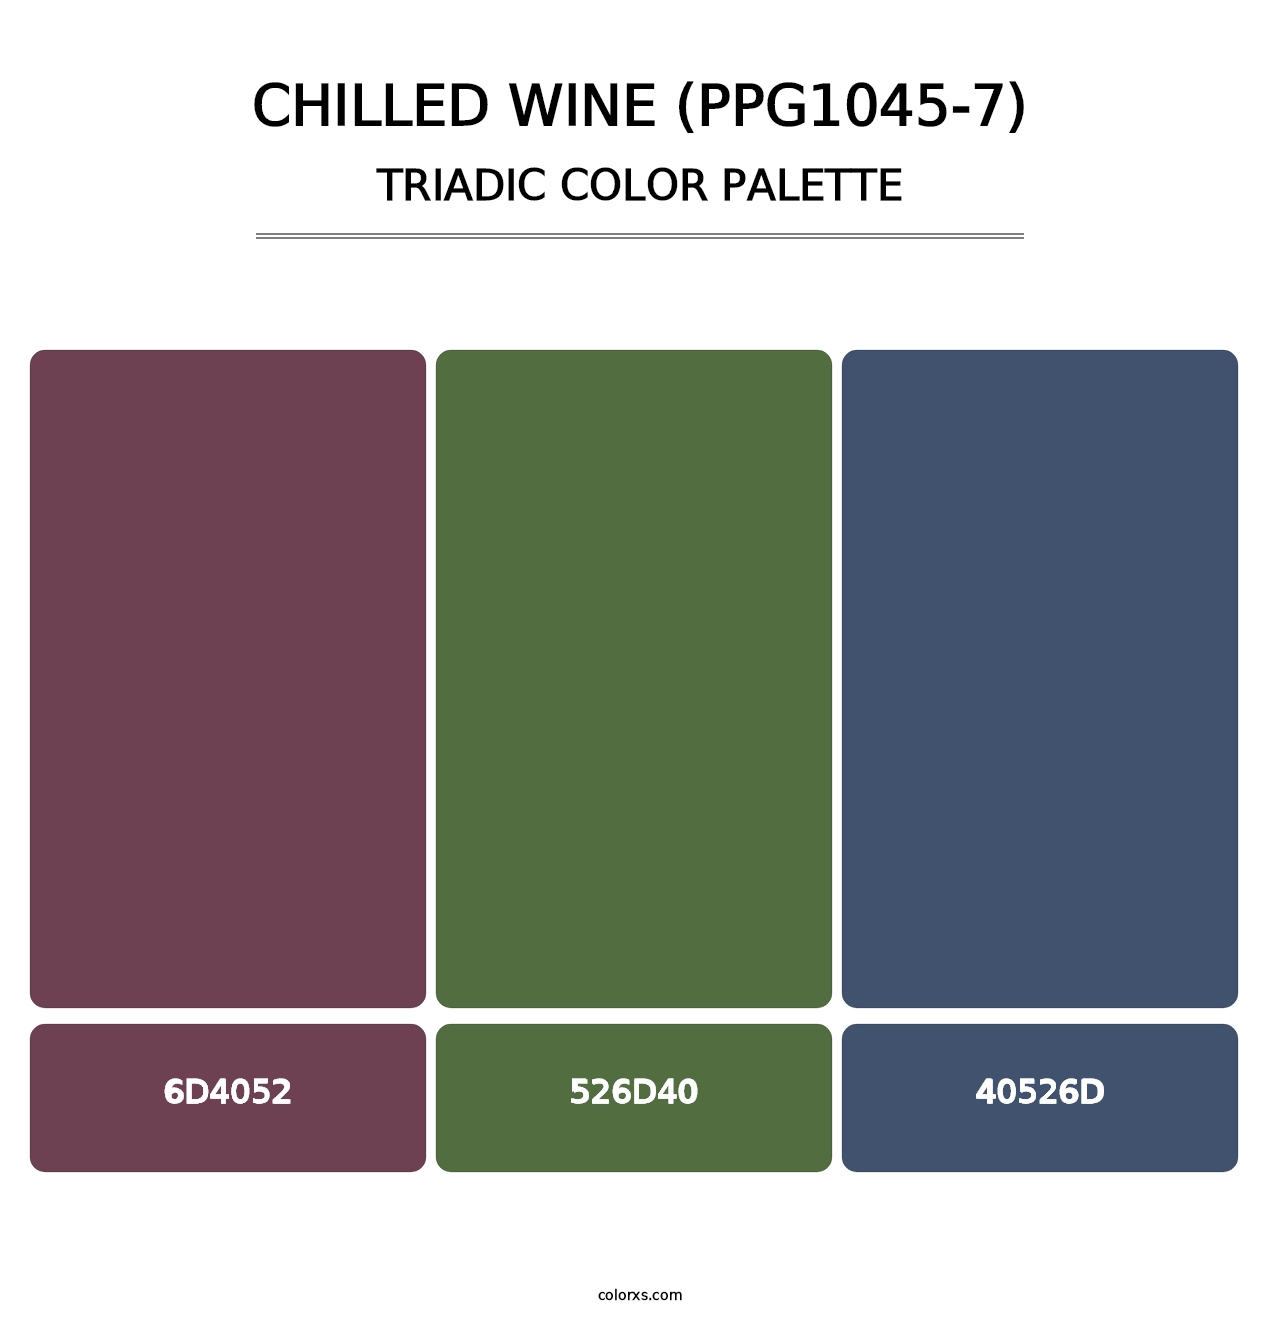 Chilled Wine (PPG1045-7) - Triadic Color Palette